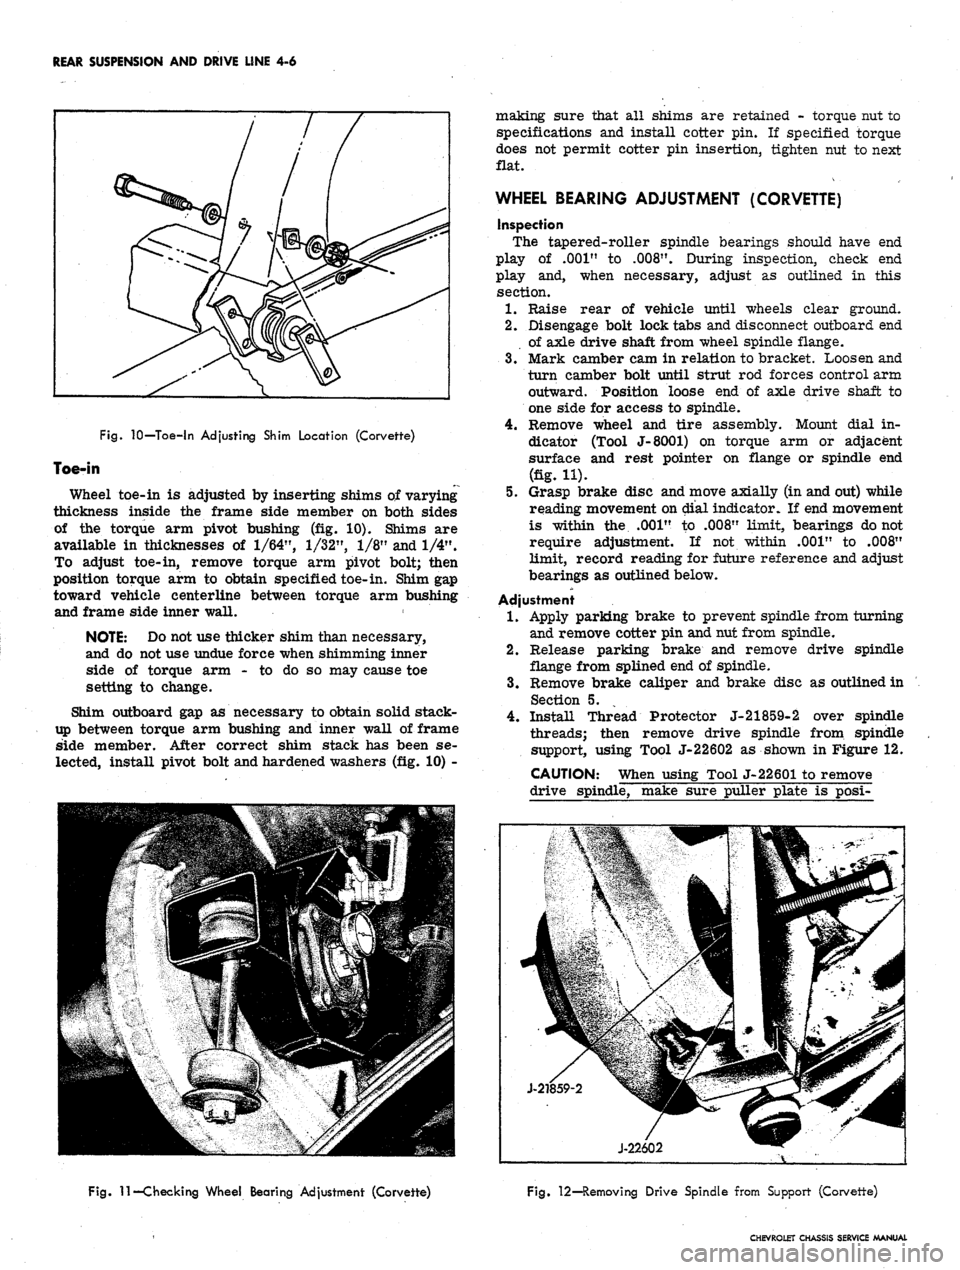 CHEVROLET CAMARO 1967 1.G Chassis Workshop Manual 
REAR SUSPENSION AND DRIVE LINE 4-6

Fig.
 10—Toe-in Adjusting Shim Location (Corvette)

Toe-in

Wheel toe-in is adjusted by inserting shims of varying

thickness inside the frame side member on bot